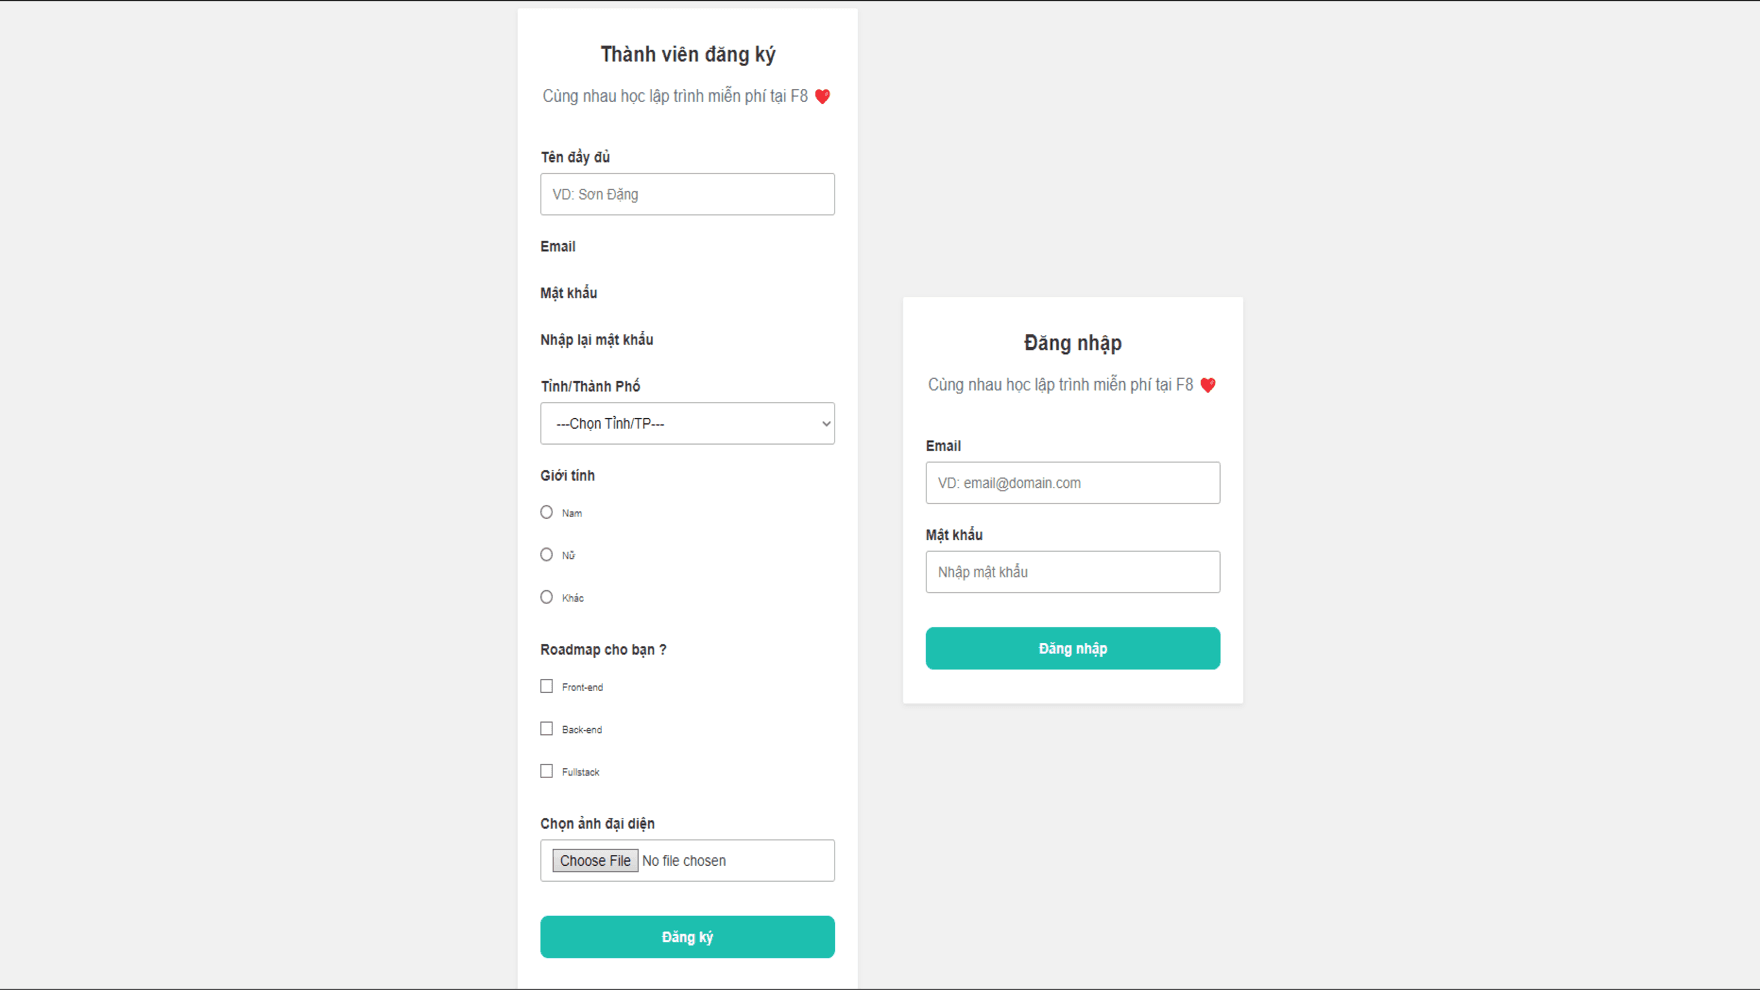 Ceate a validation form using HTML, CSS and Javascript.